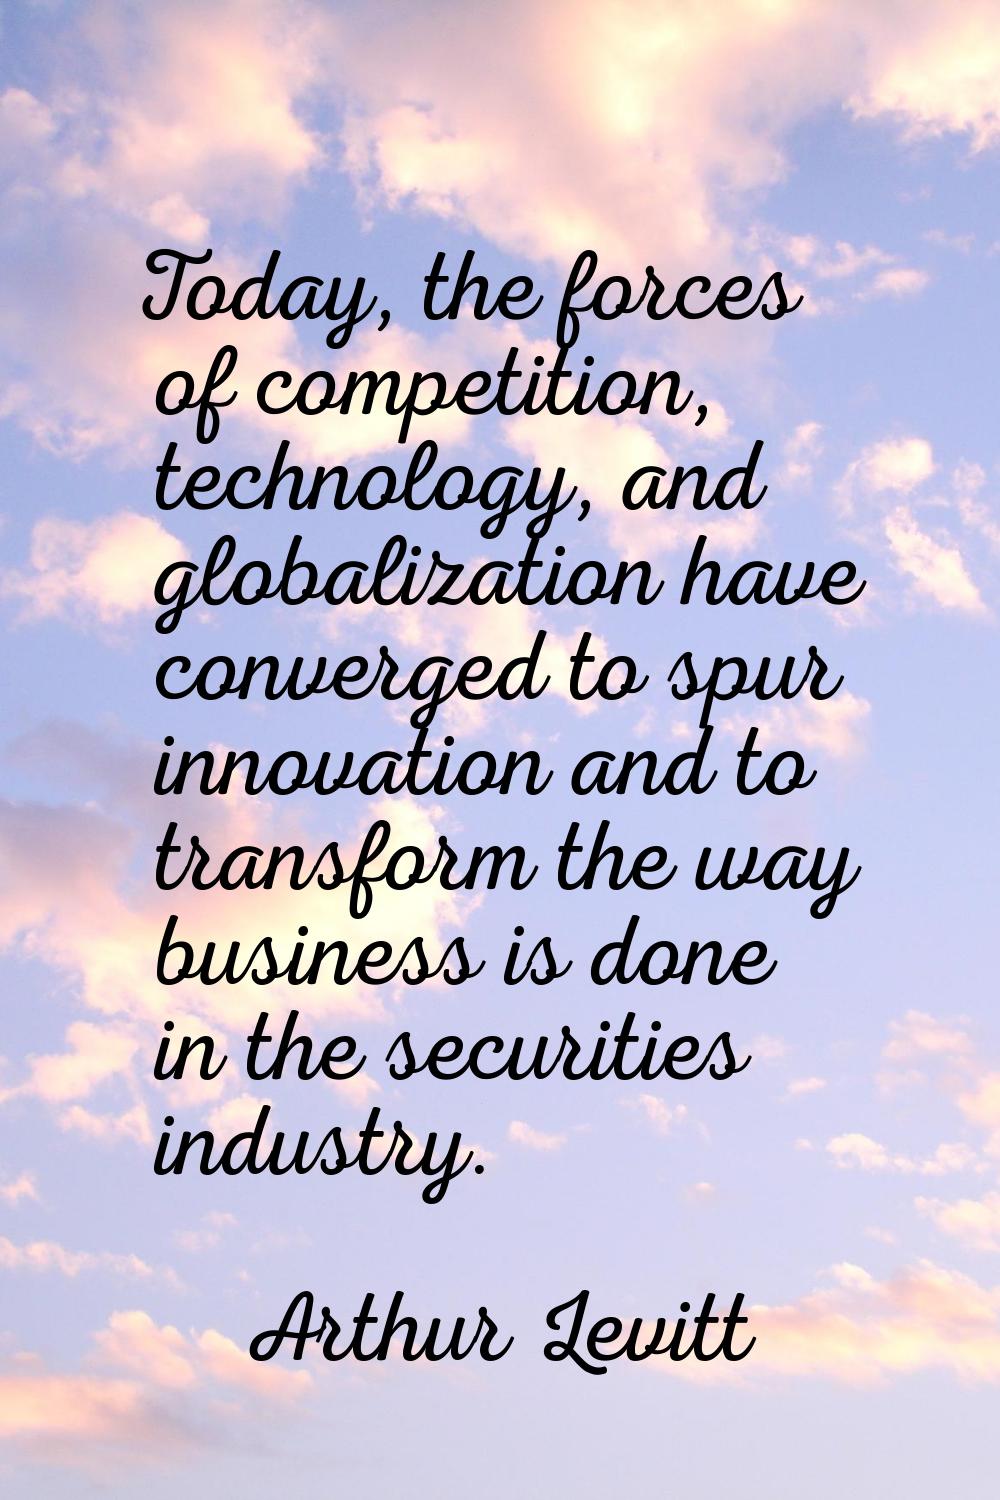 Today, the forces of competition, technology, and globalization have converged to spur innovation a